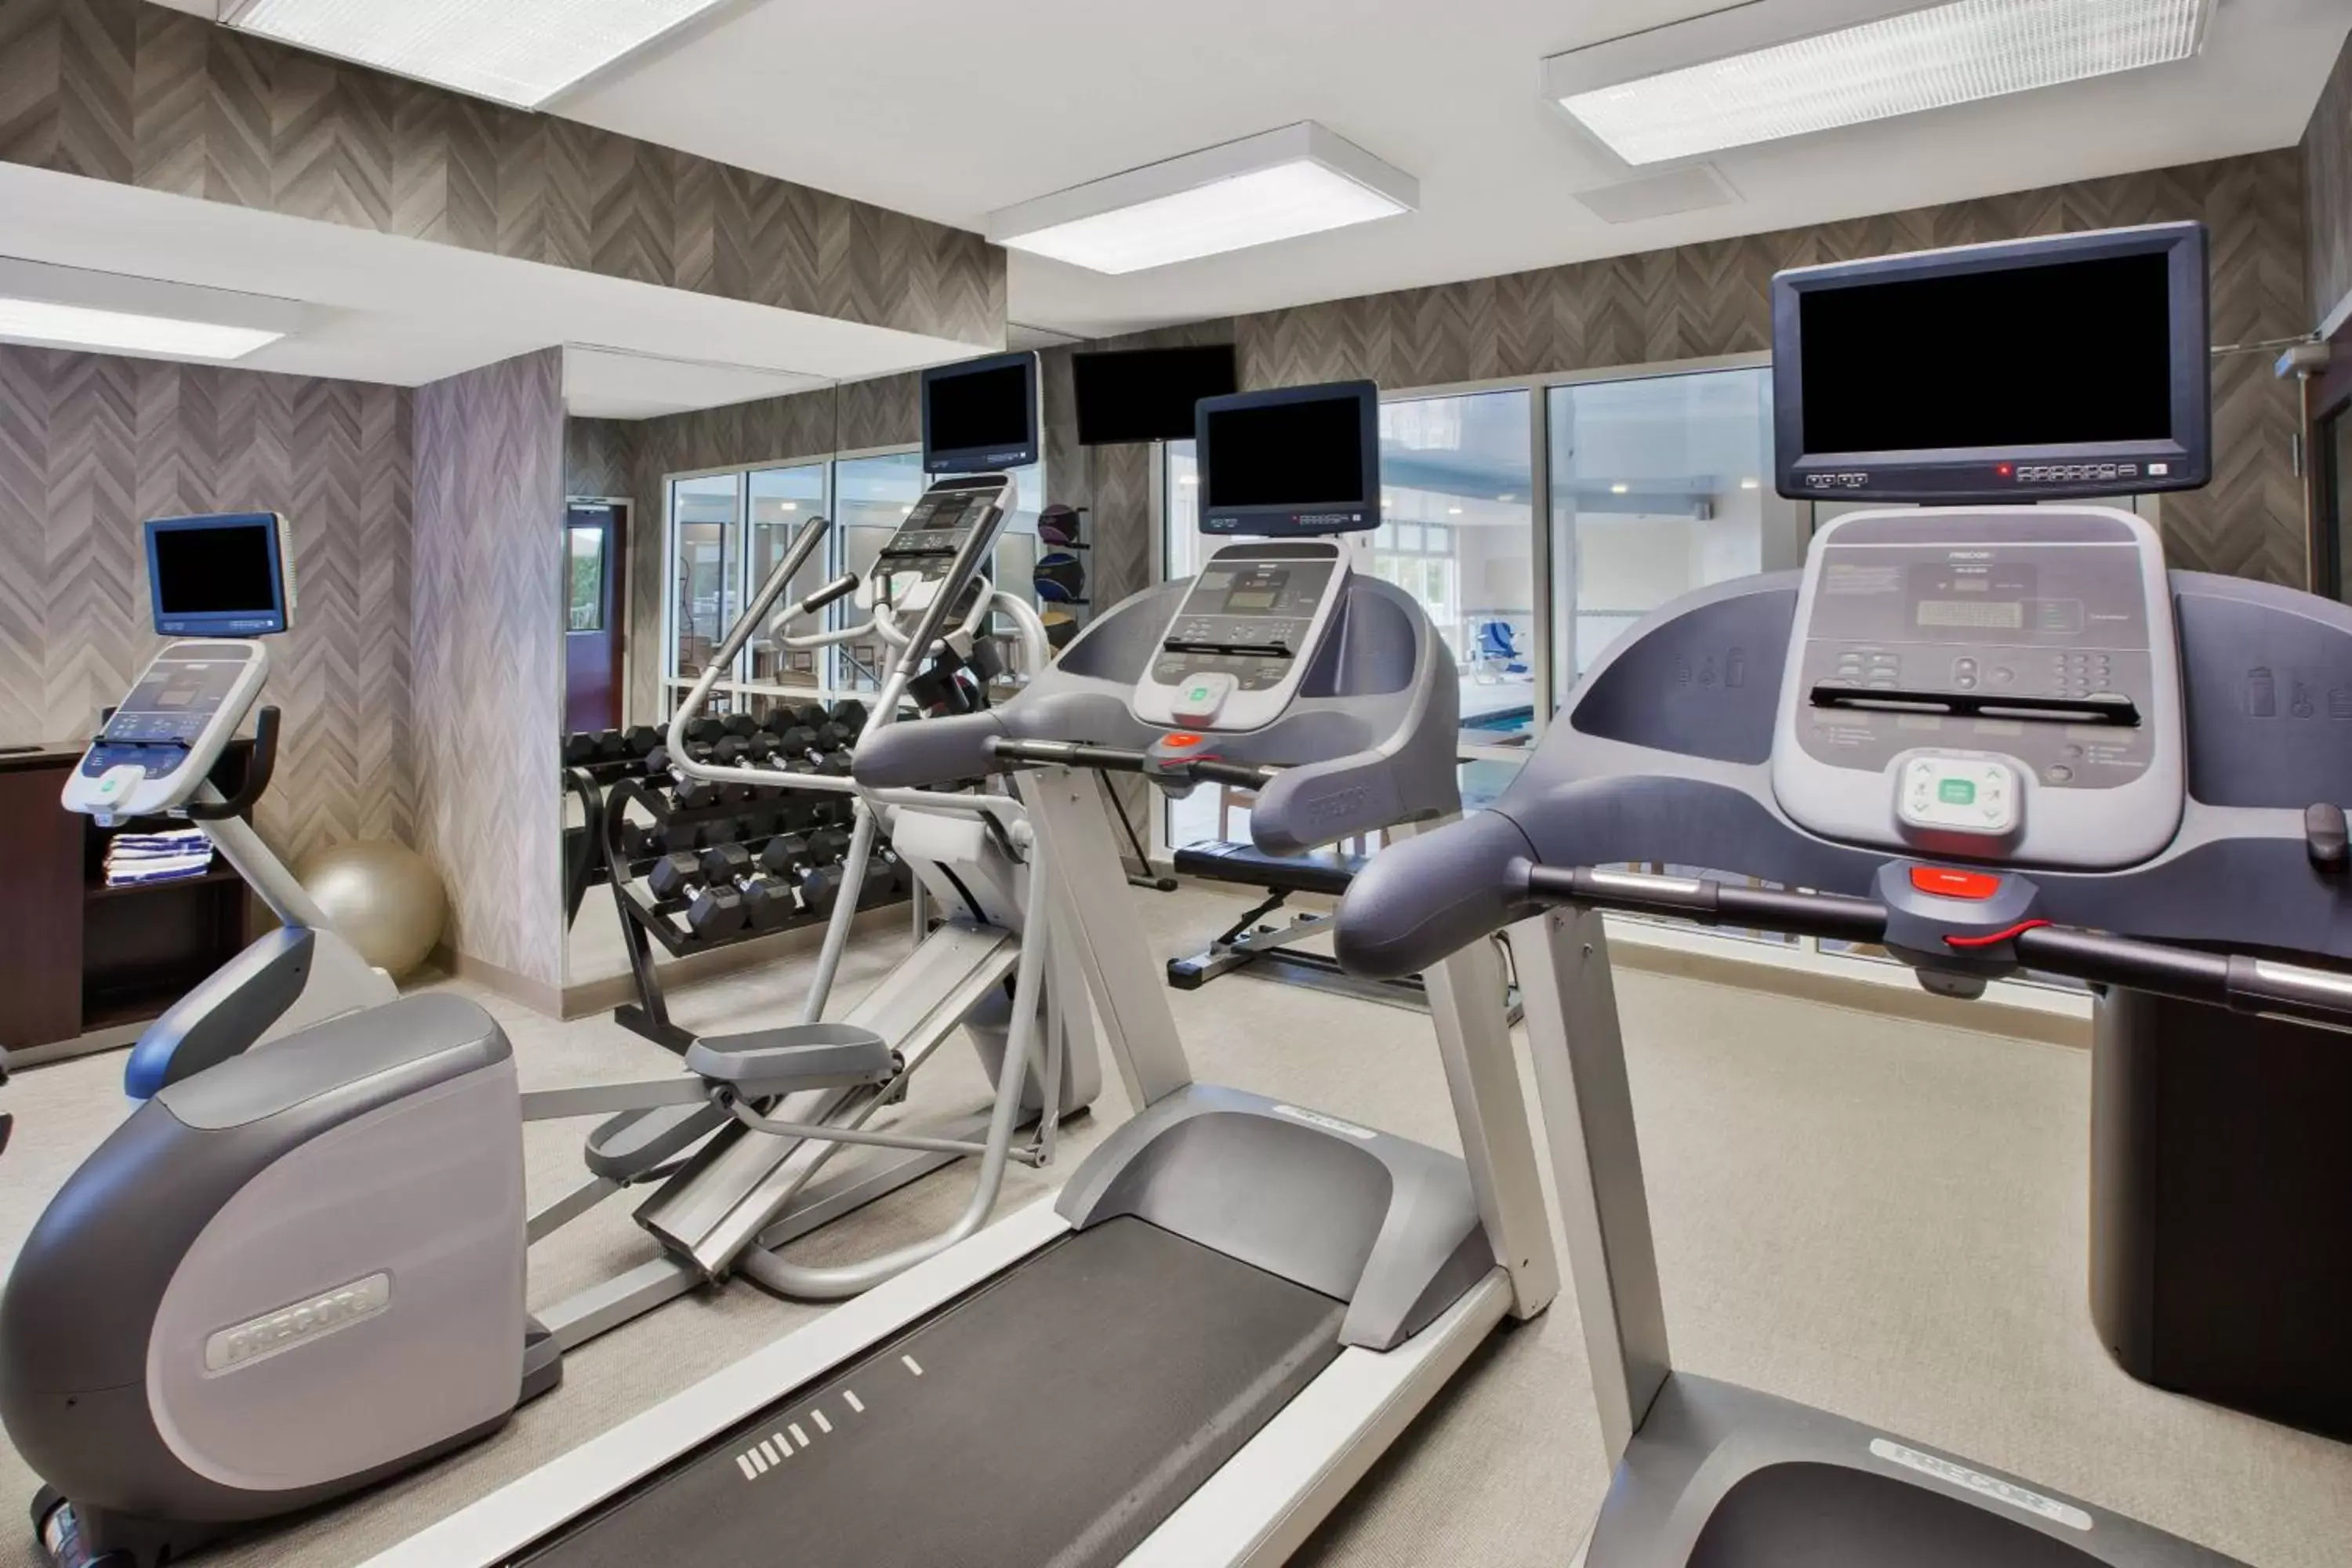 Fitness centre/facilities, Fitness Center/Facilities in SpringHill Suites Minneapolis-St. Paul Airport/Eagan